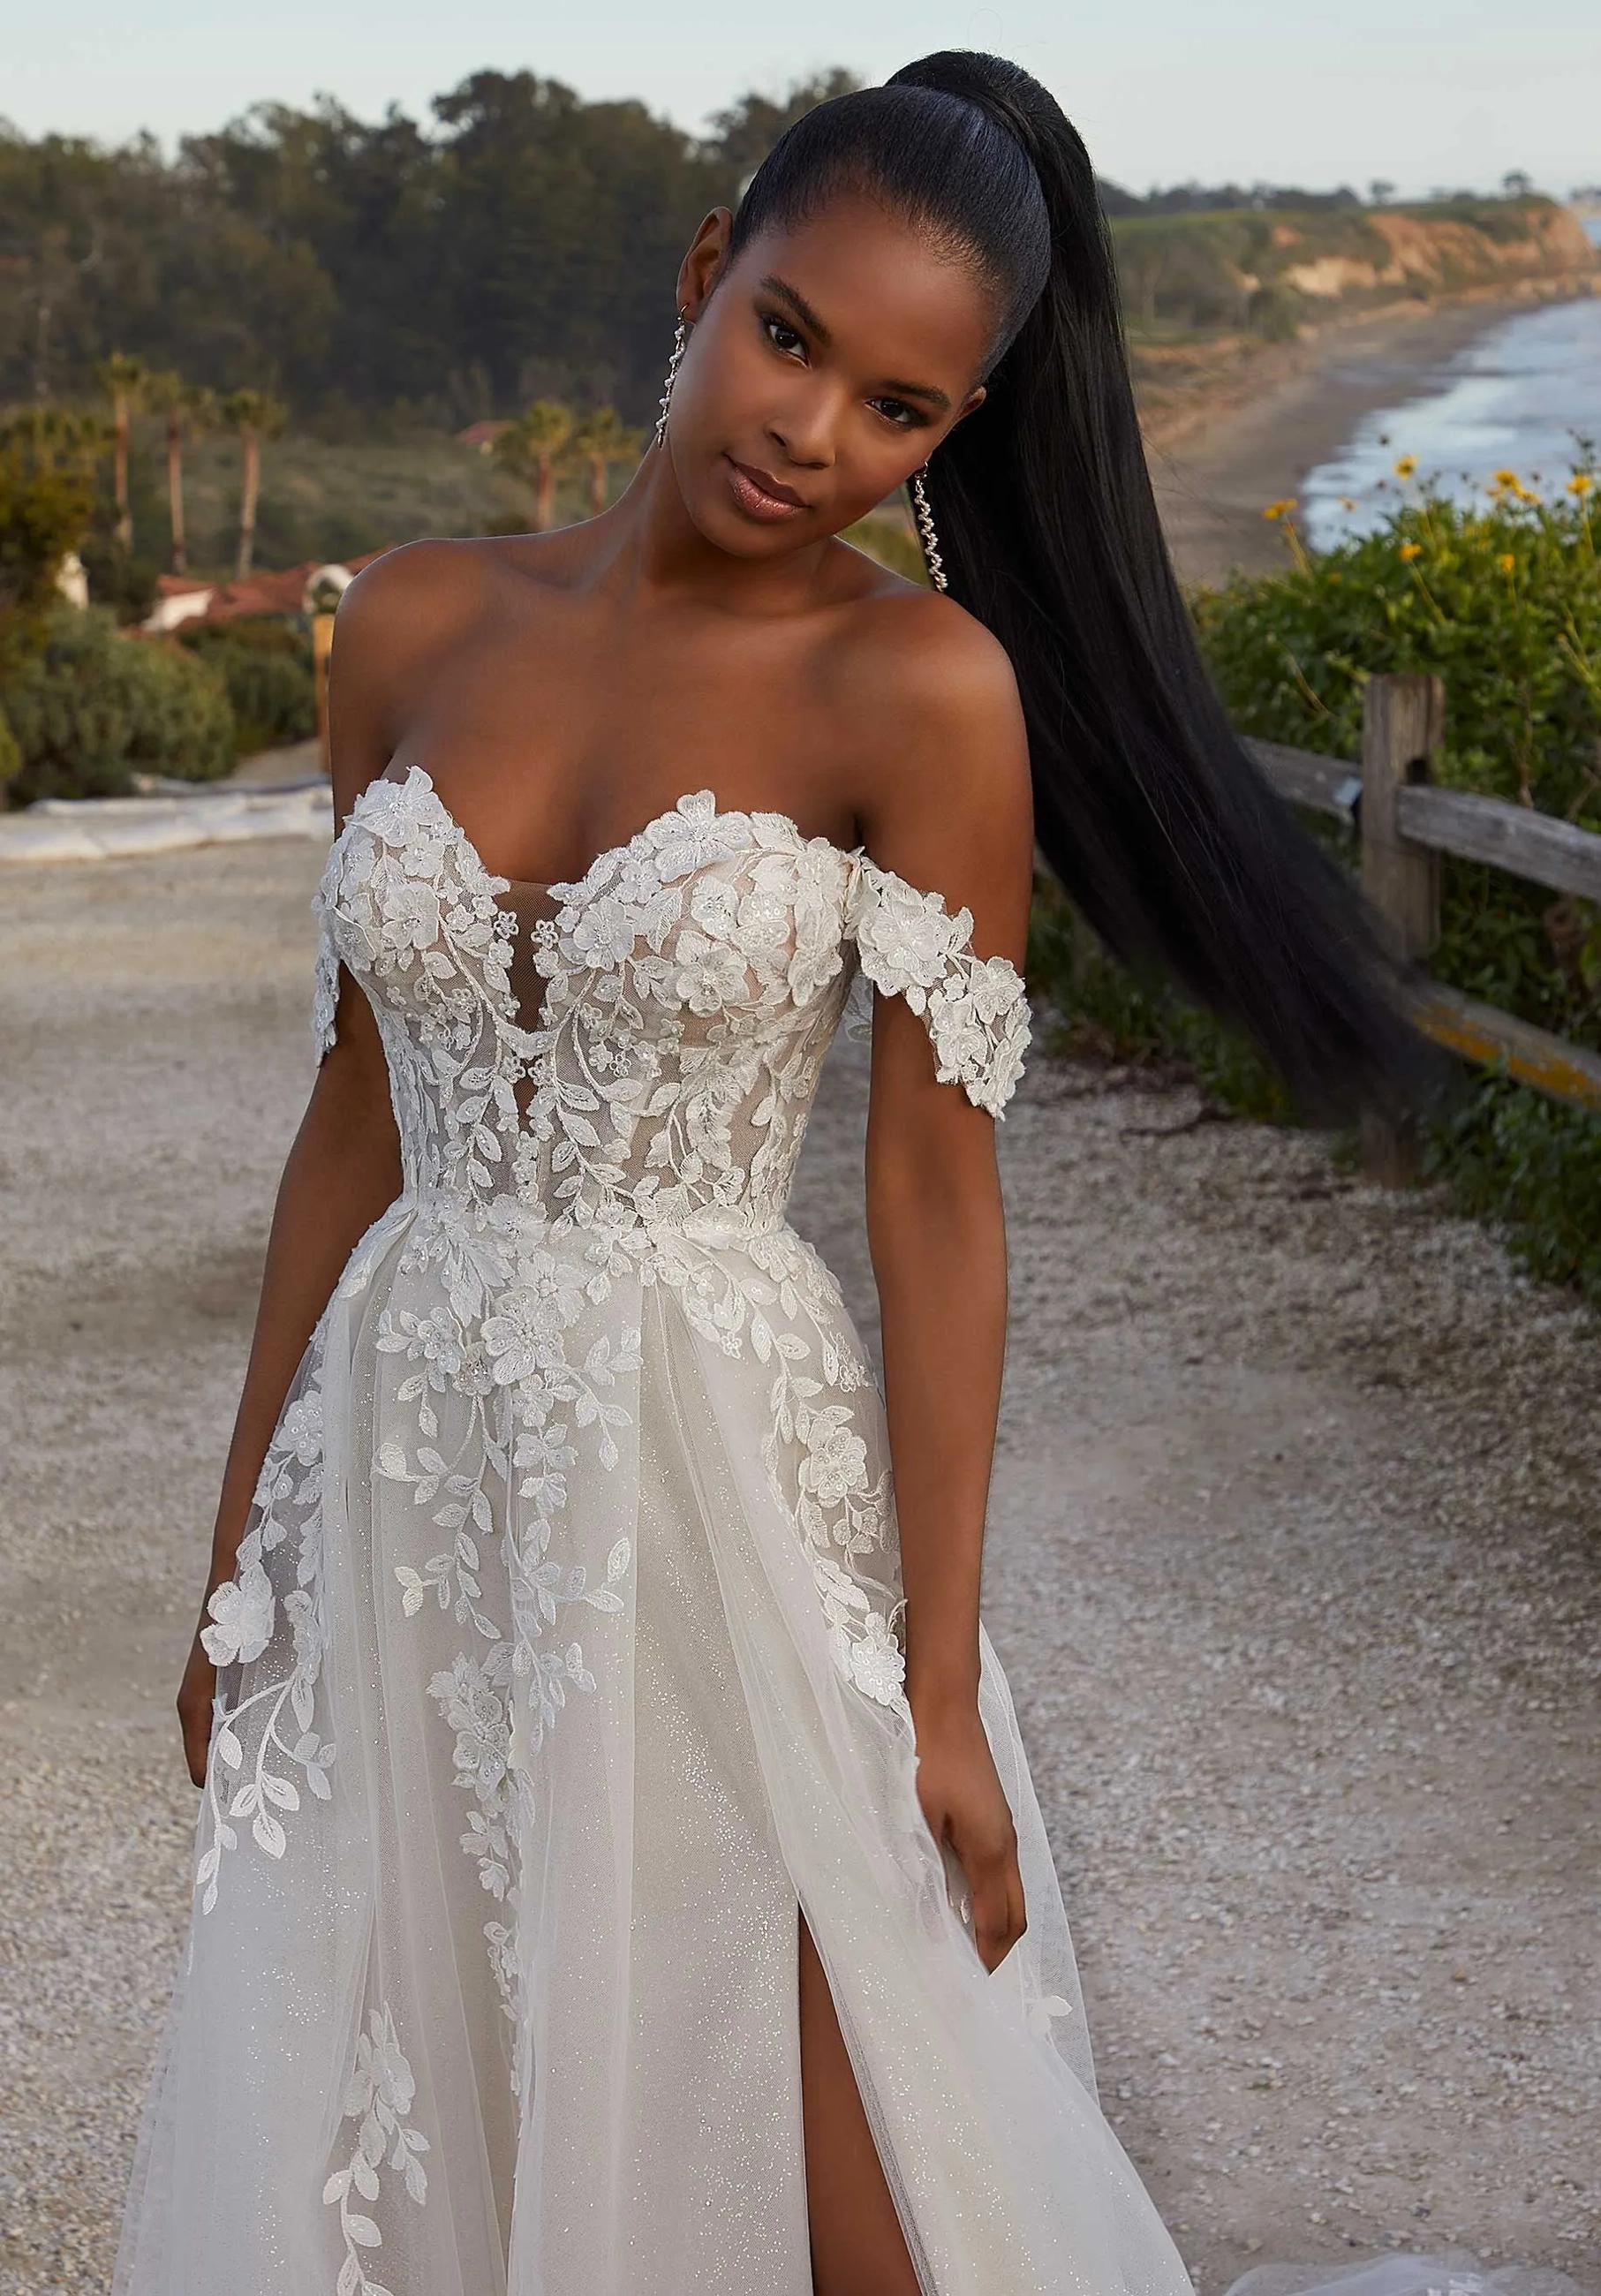 Dream Wedding Dress – Find The Dress Of Your Dreams